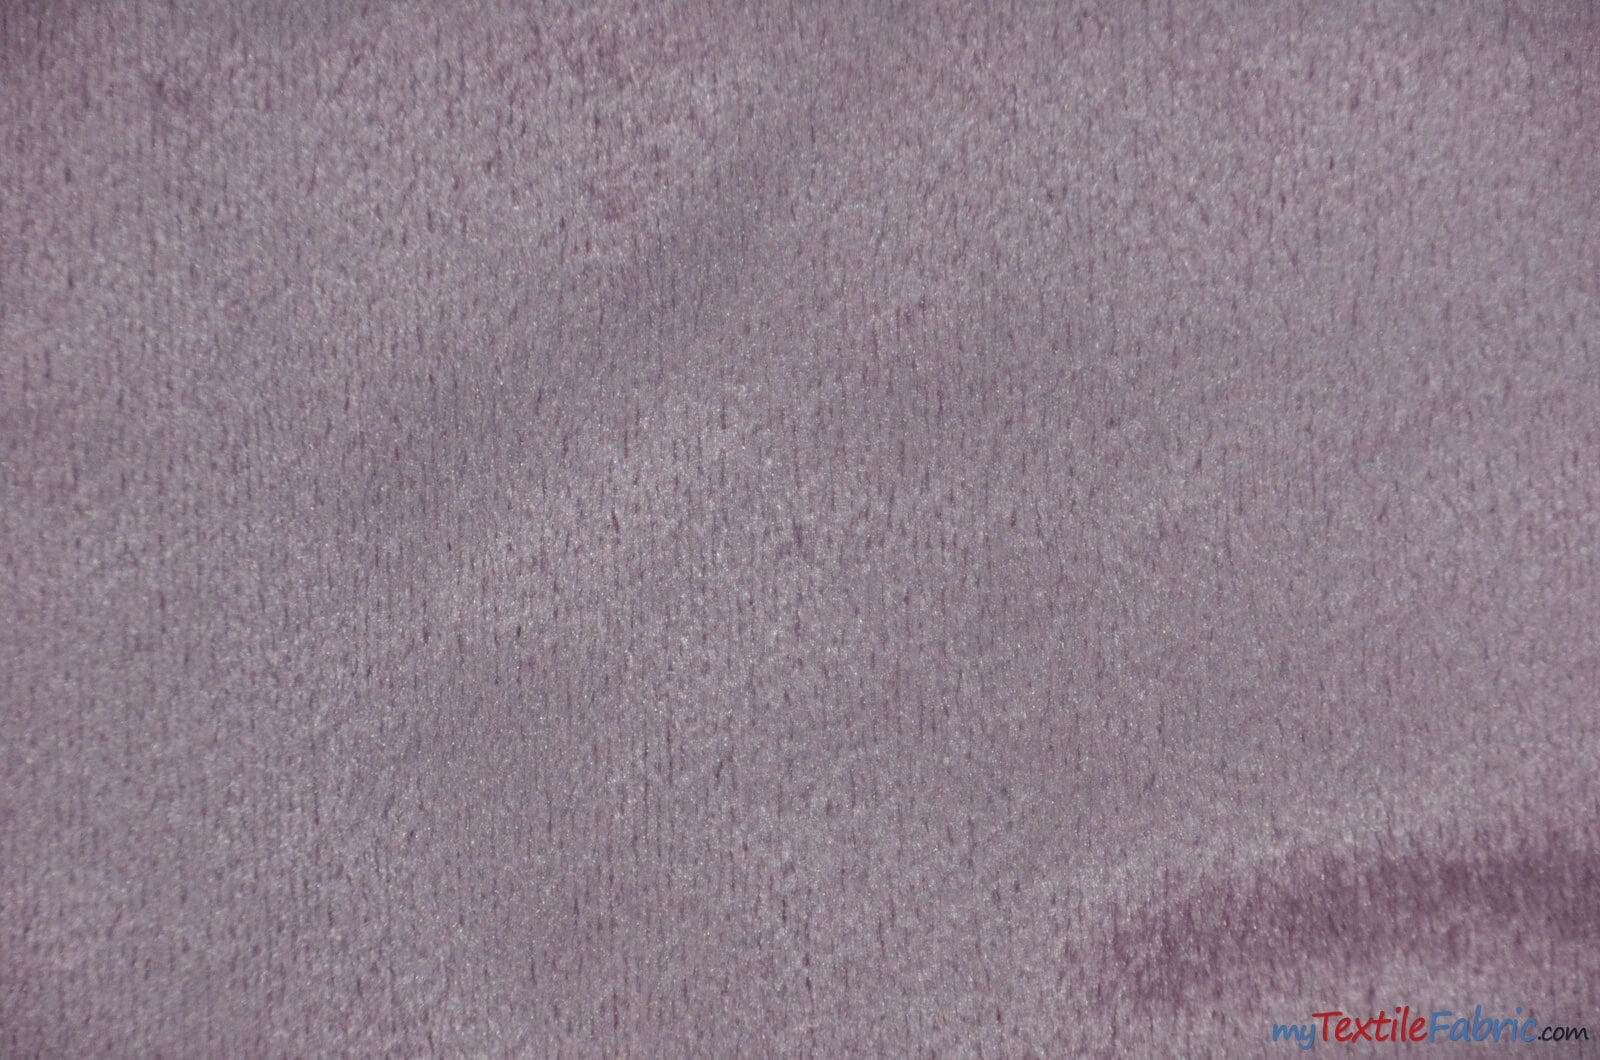 Royal Velvet Fabric | Soft and Plush Non Stretch Velvet Fabric | 60" Wide | Apparel, Decor, Drapery and Upholstery Weight | Multiple Colors | Wholesale Bolt | Fabric mytextilefabric Bolts Lilac 